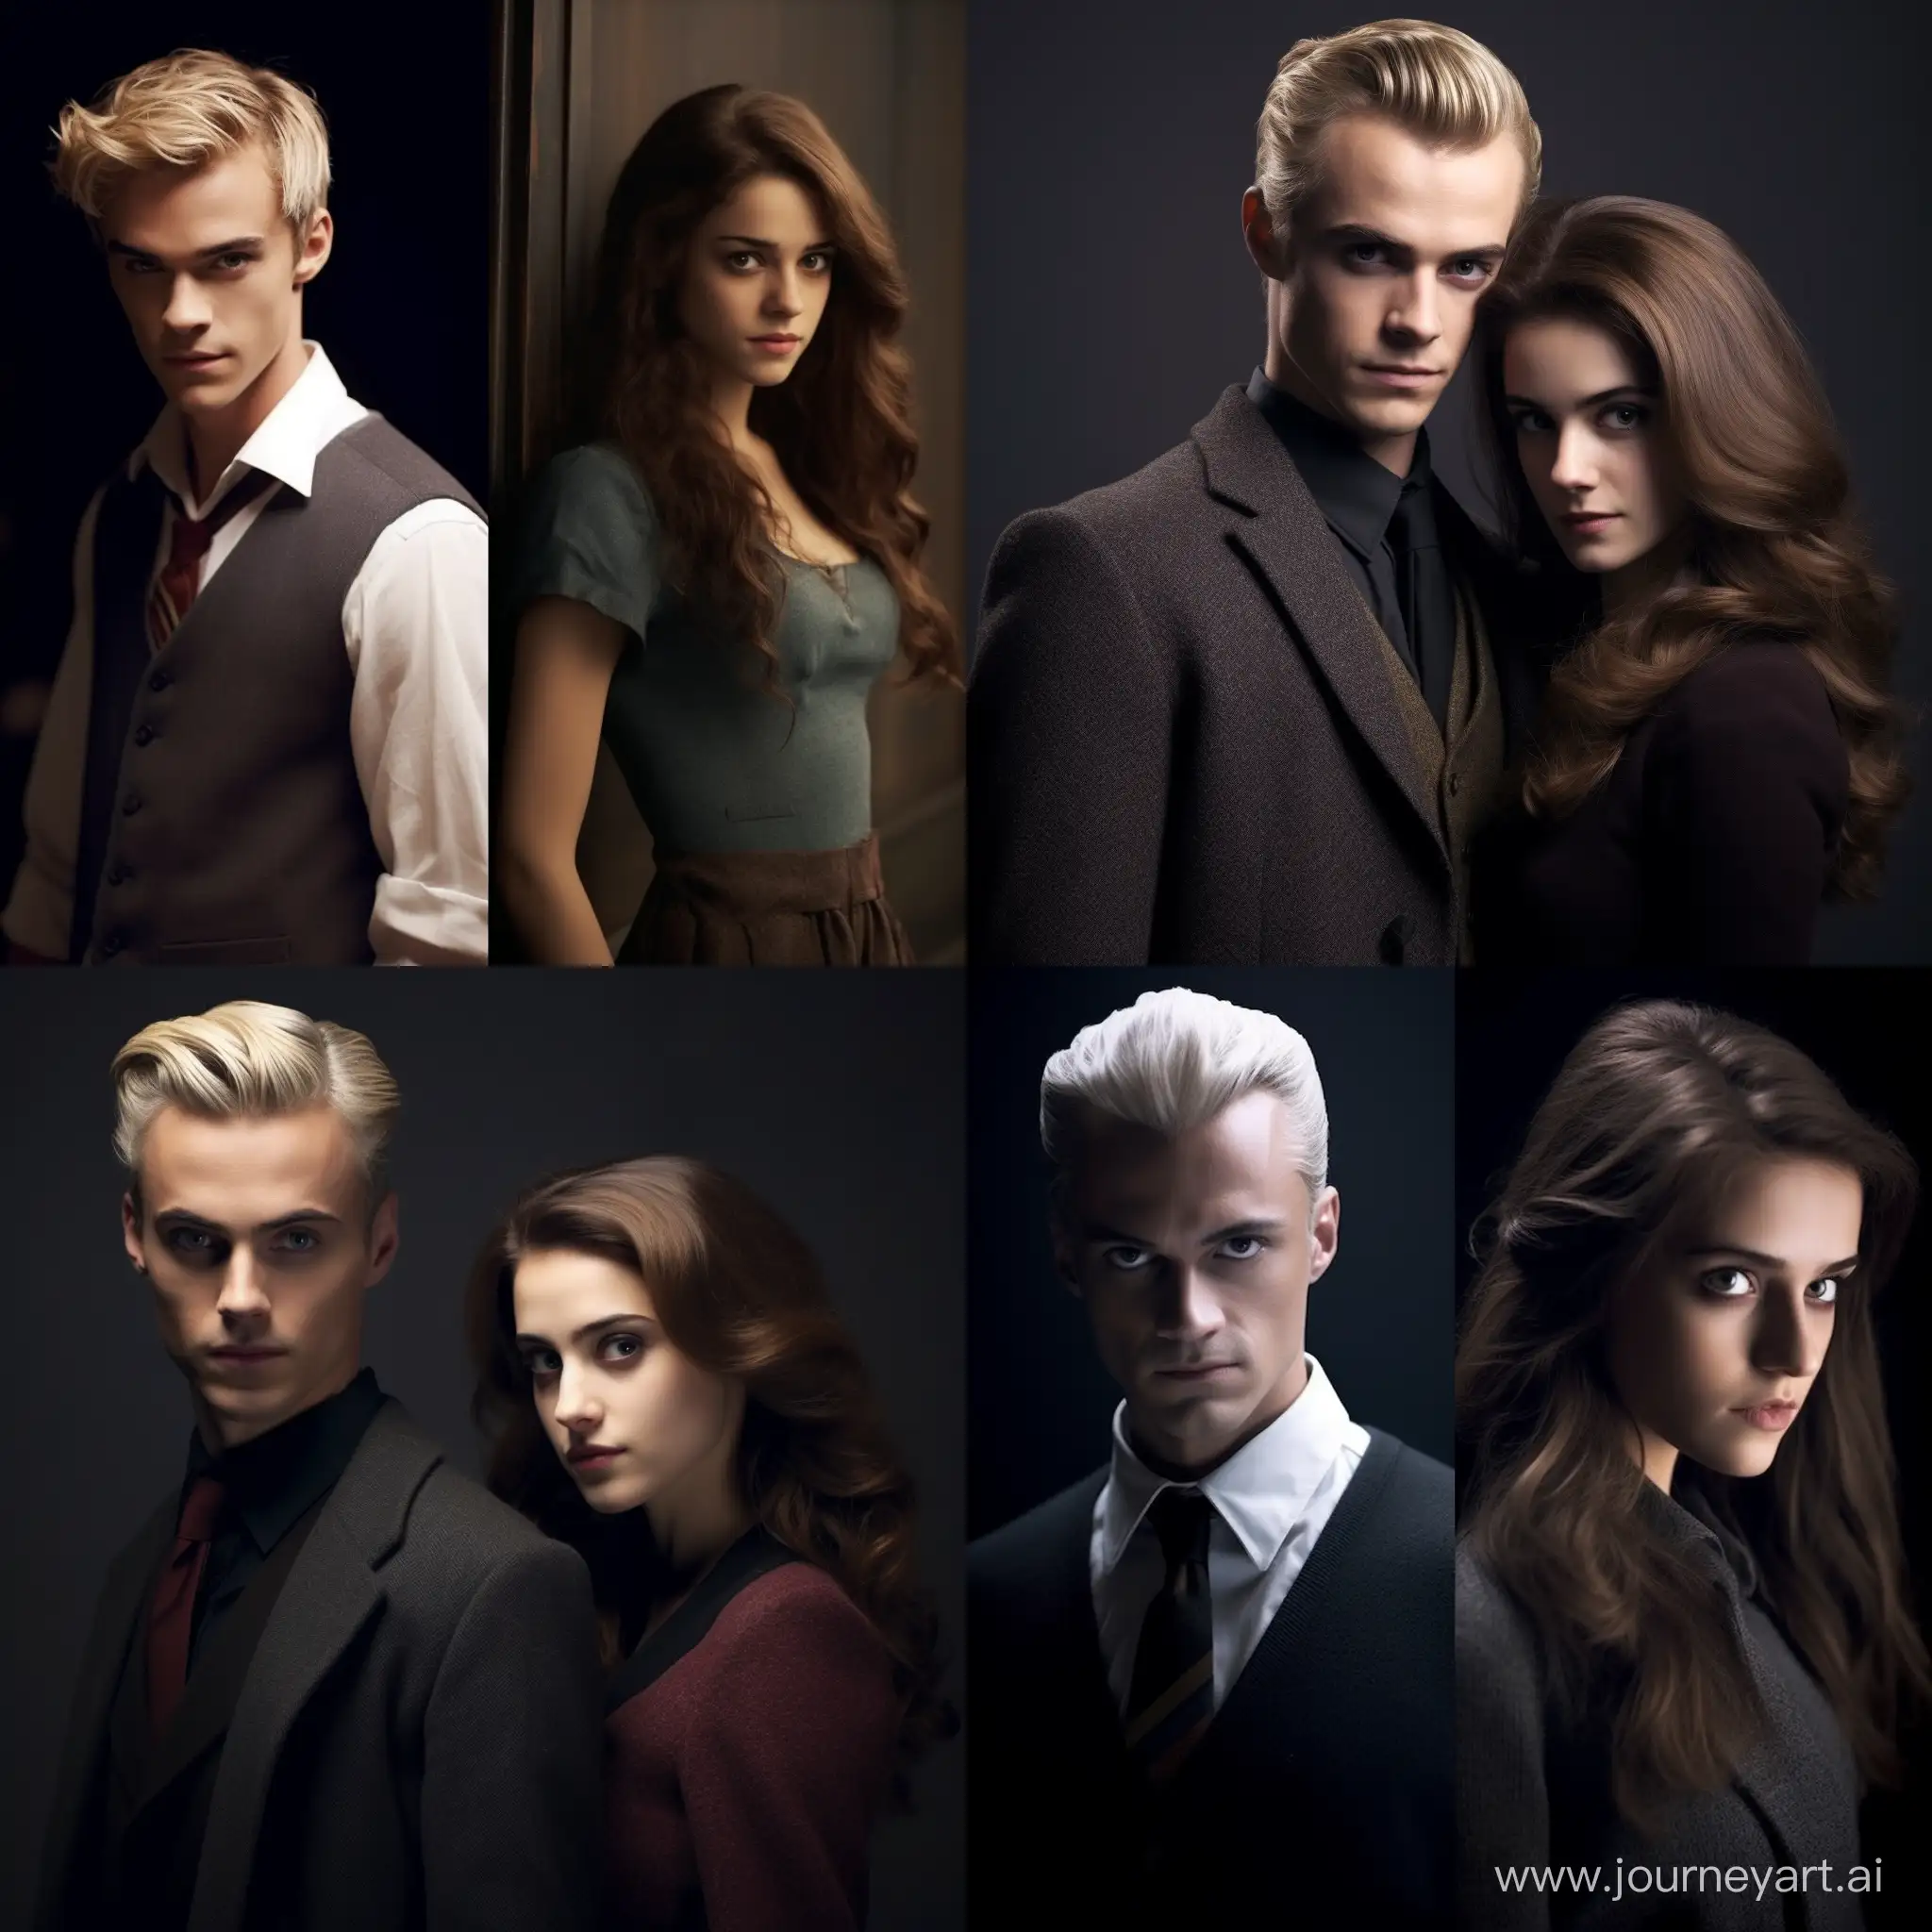 Draco-Malfoy-and-Brunette-Hermione-Granger-in-a-11-Artistic-Rendition